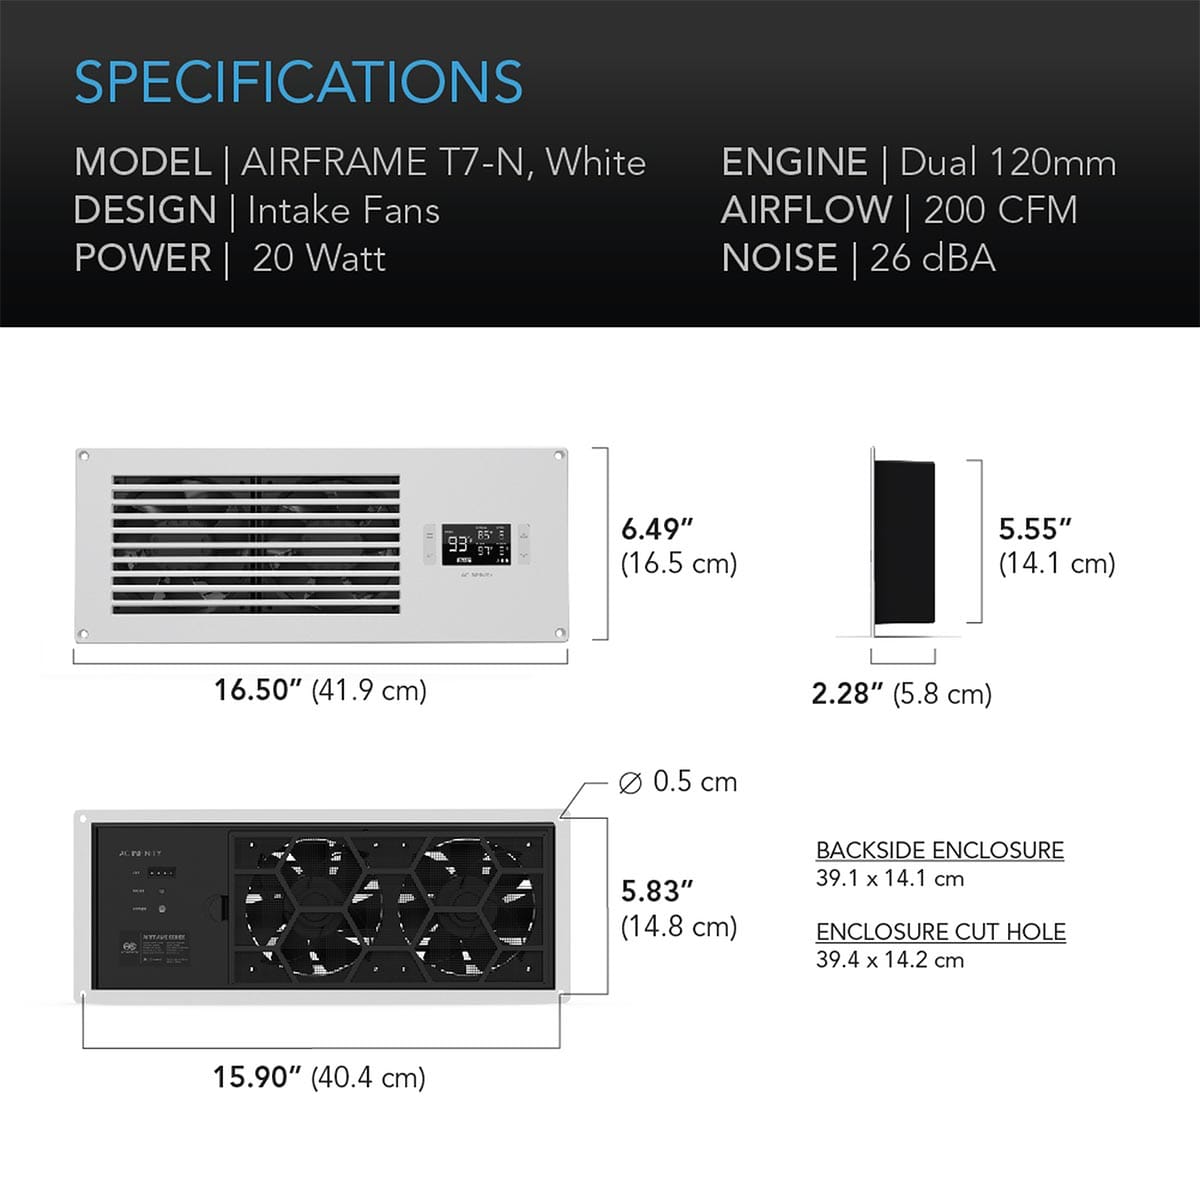 AC Infinity AC Infinity AIRFRAME T7-N AV Equipment Closet and Room Cooling System - Front Intake Component Cooling